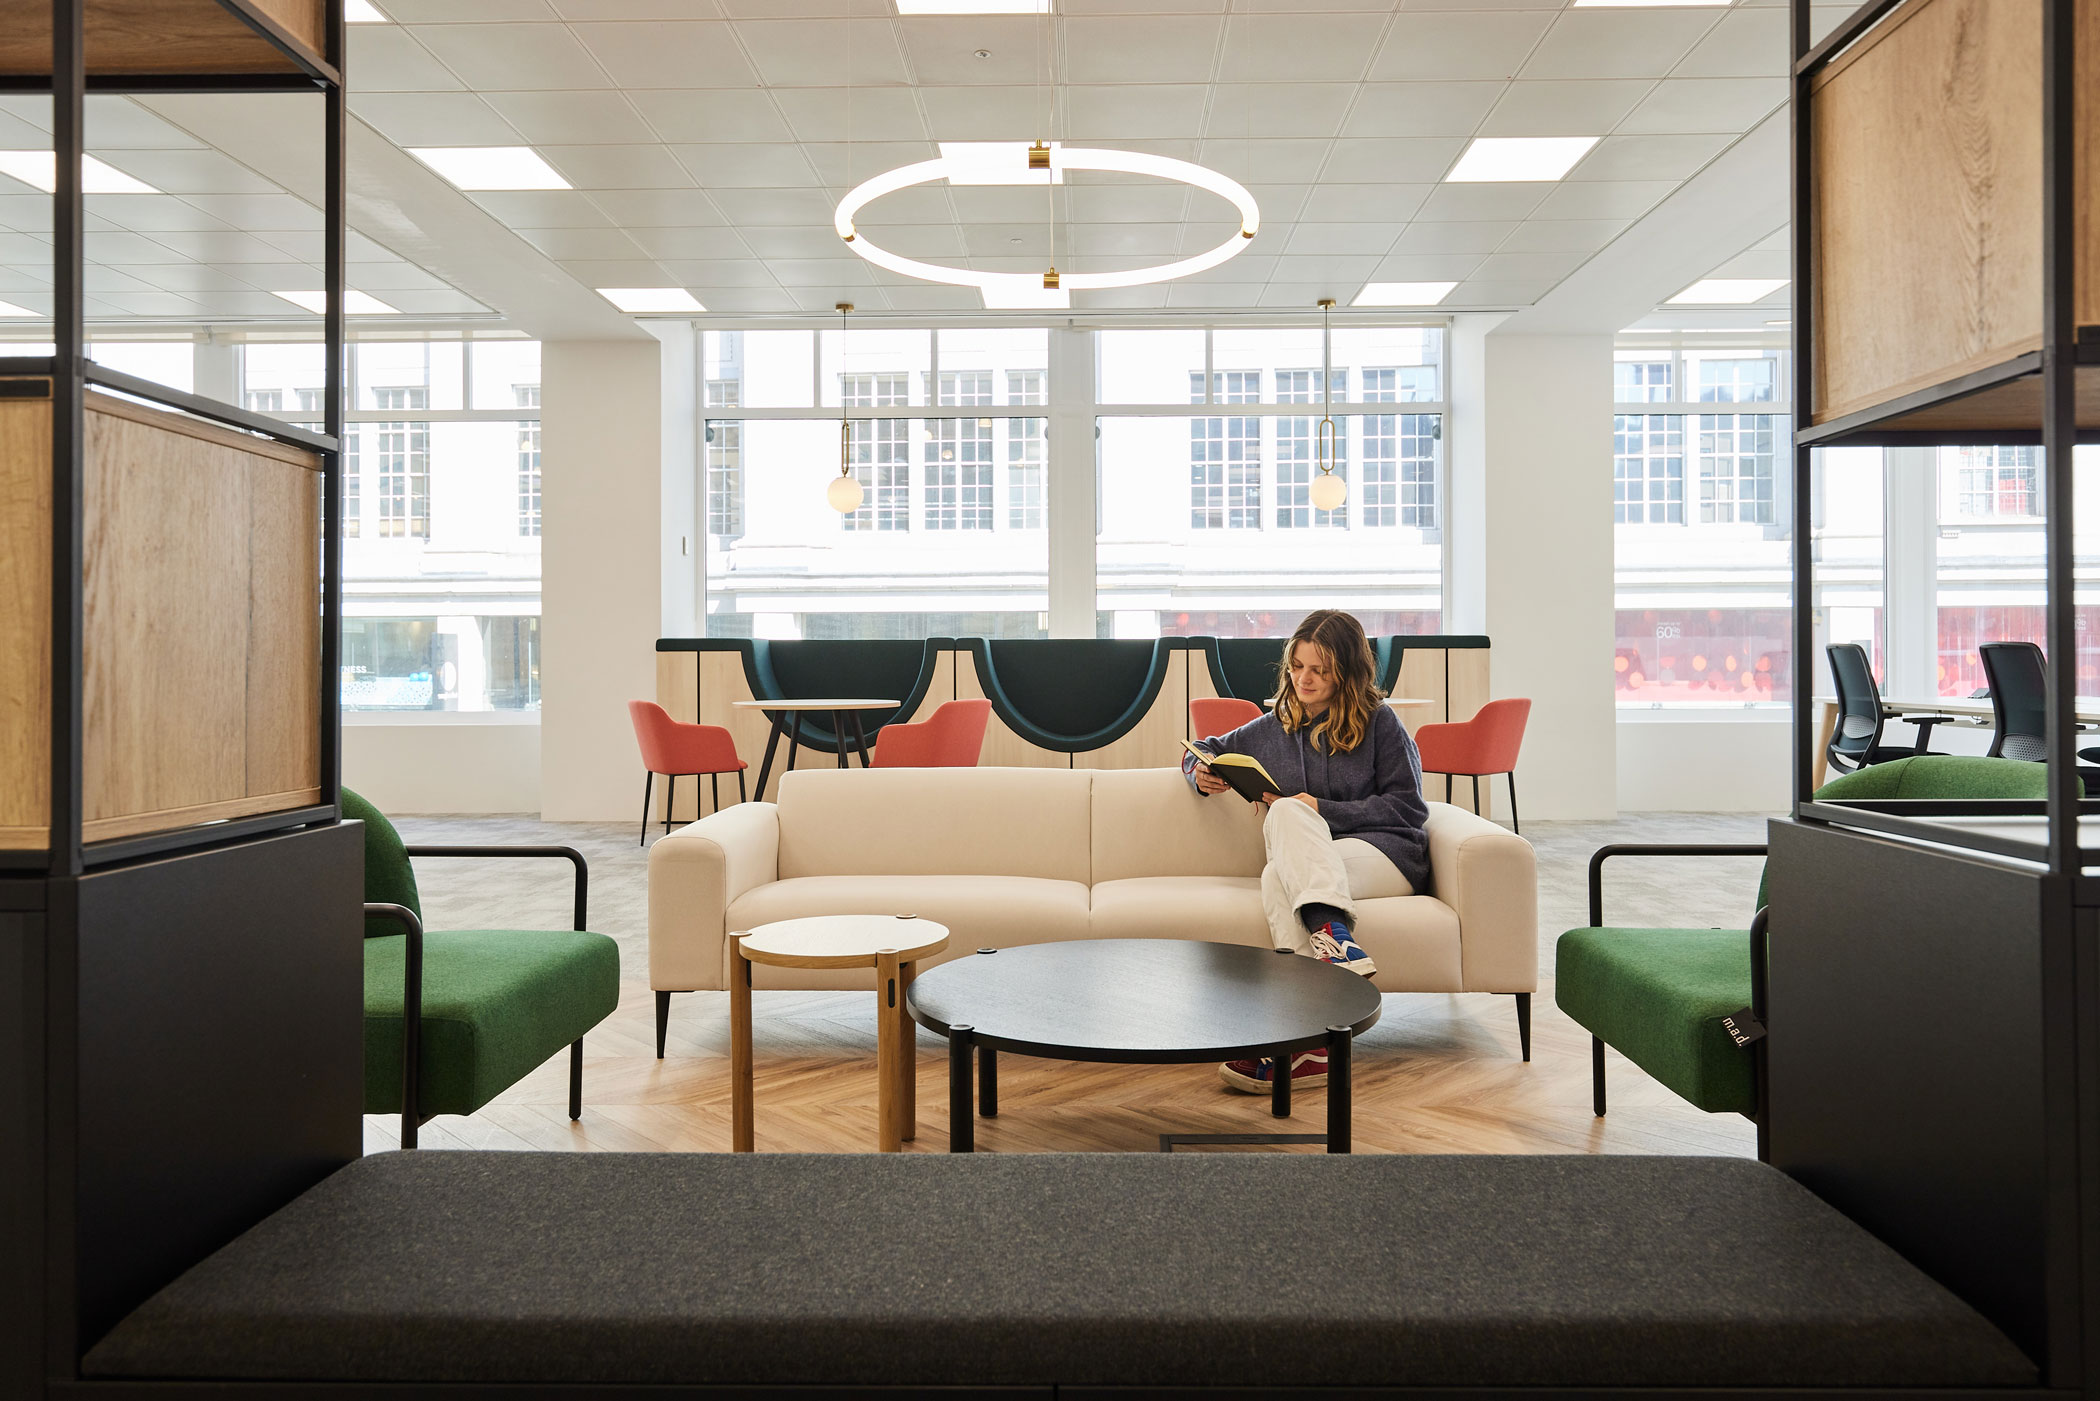 Social seating in a London office interior design with a woman reading a book